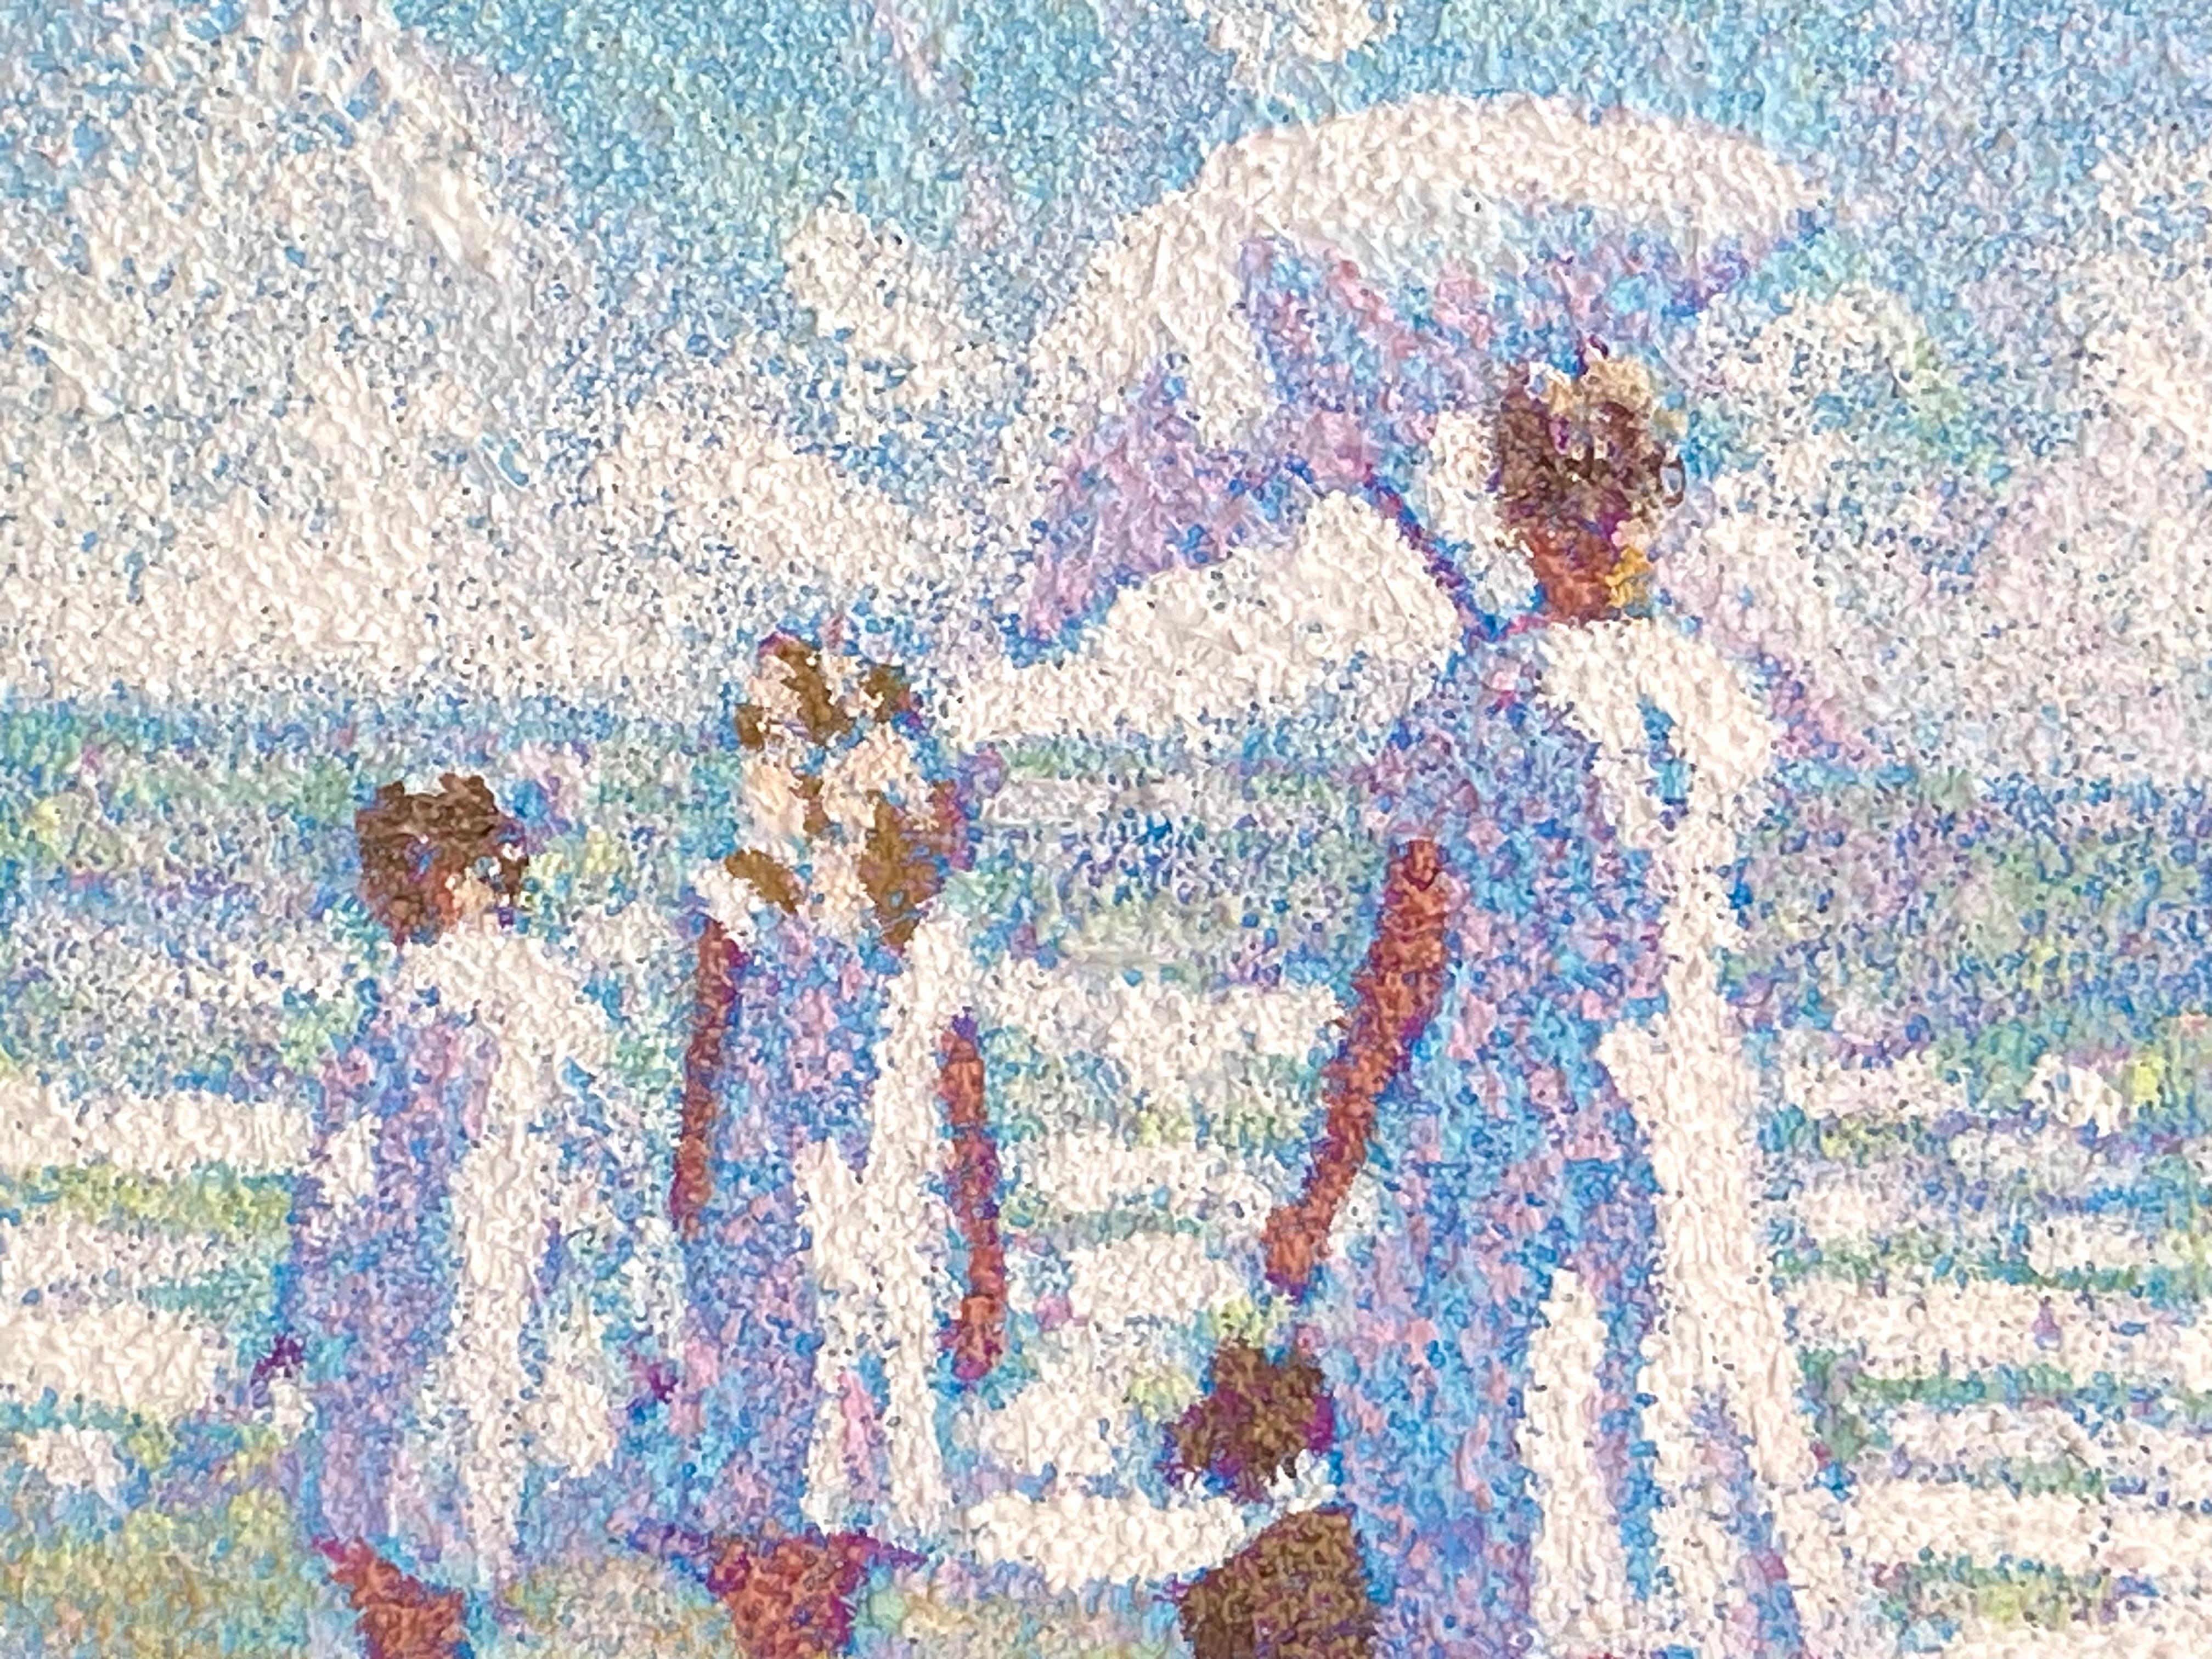 “Perfect Beach Day” - Post-Impressionist Painting by Henry Benson